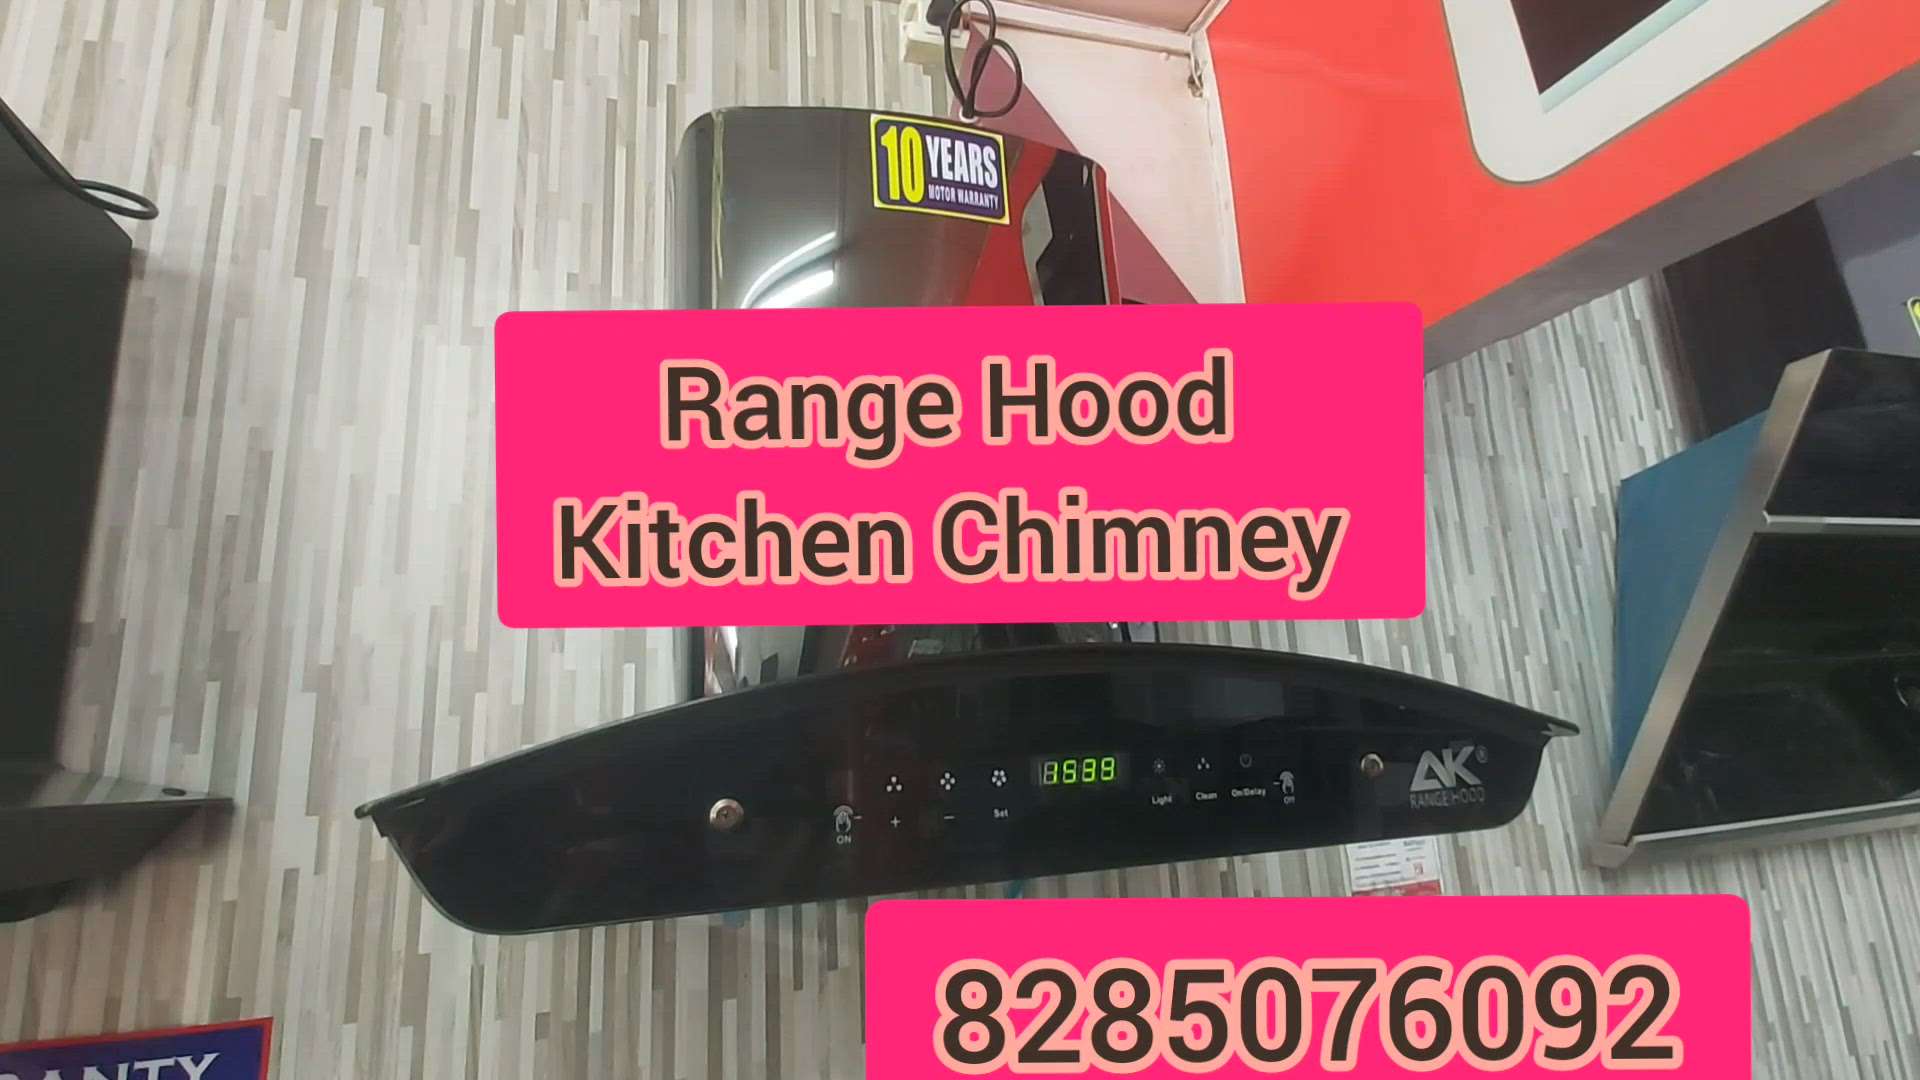 #rangehoodchimney
 #kitchenchimney 
 #10yearwarranty 
 #coppermotor
 #1200suctionpower
 #handsensor
 #oilcollector

Brand
Range Hood
1200 Suction Power,
Oil Collector, Lights,
Hand Sensor And Touch Pad System,
10 Year Warranty, Aluminium Pipe With Fitting Only For You- 13000 Rs.

For Order- 8285076092